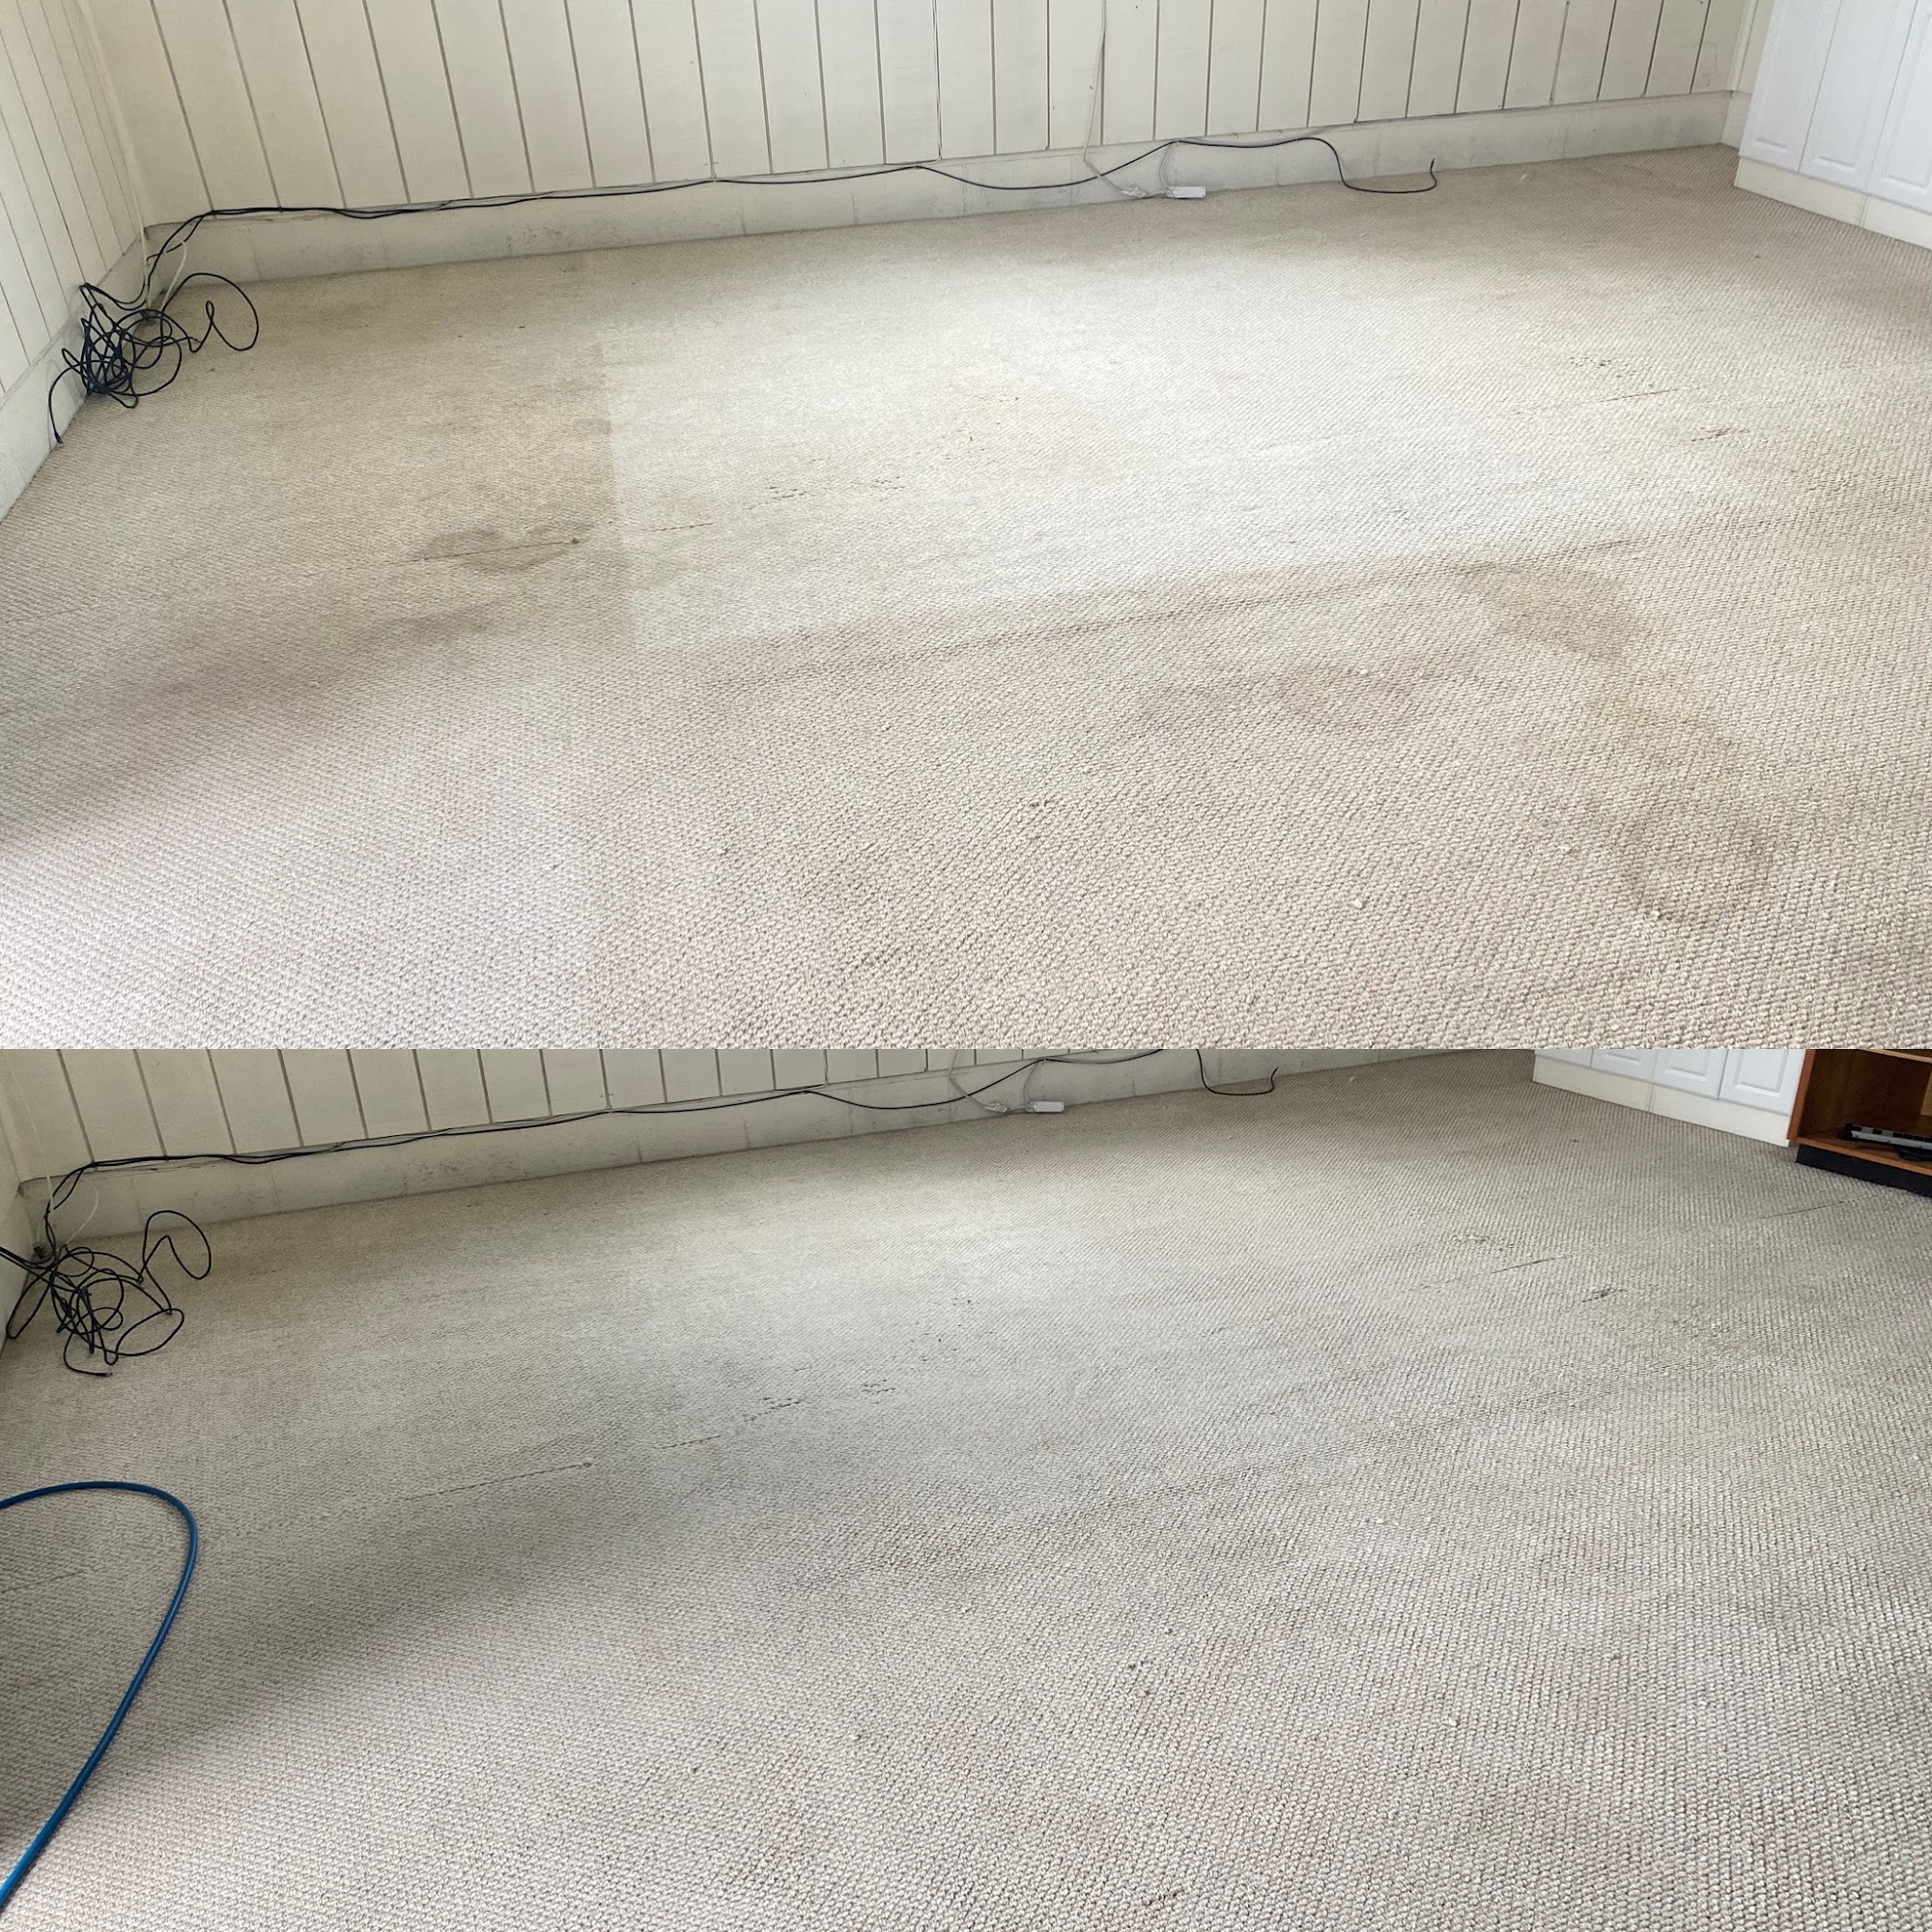 Maui Steamers Carpet and Upholstery Cleaning Services